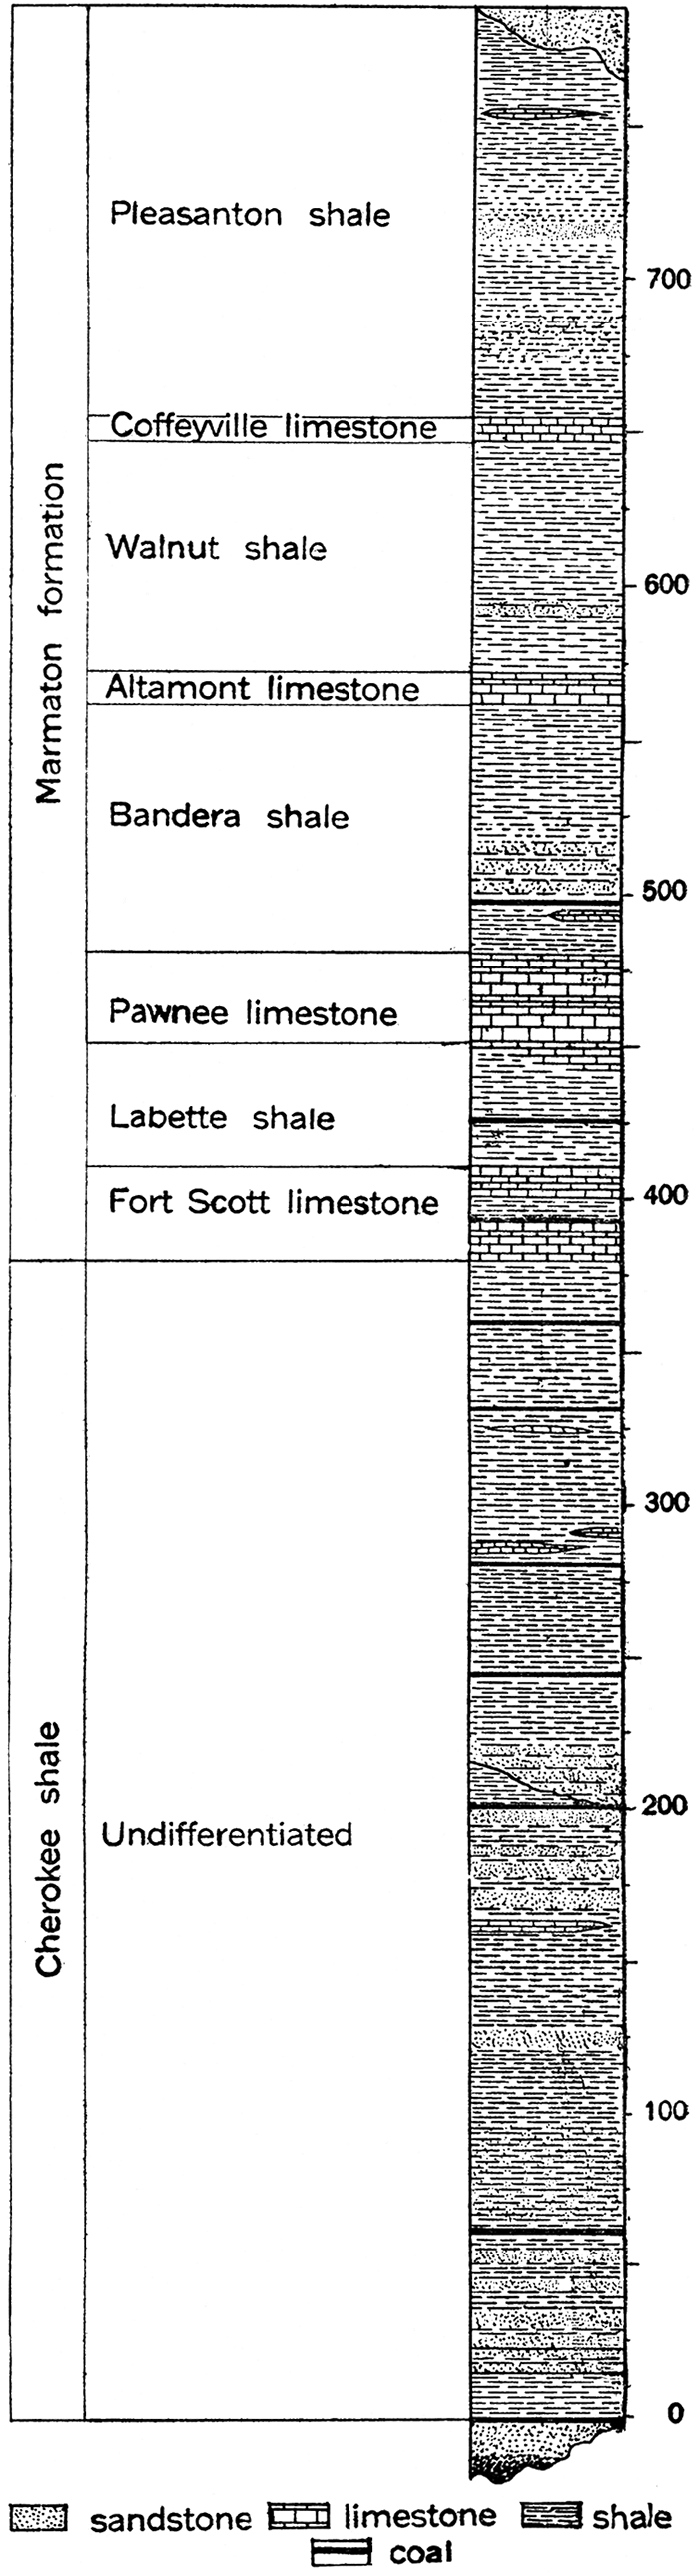 Generalized section of the Des Moines group of the Pennsylvanian in Kansas.